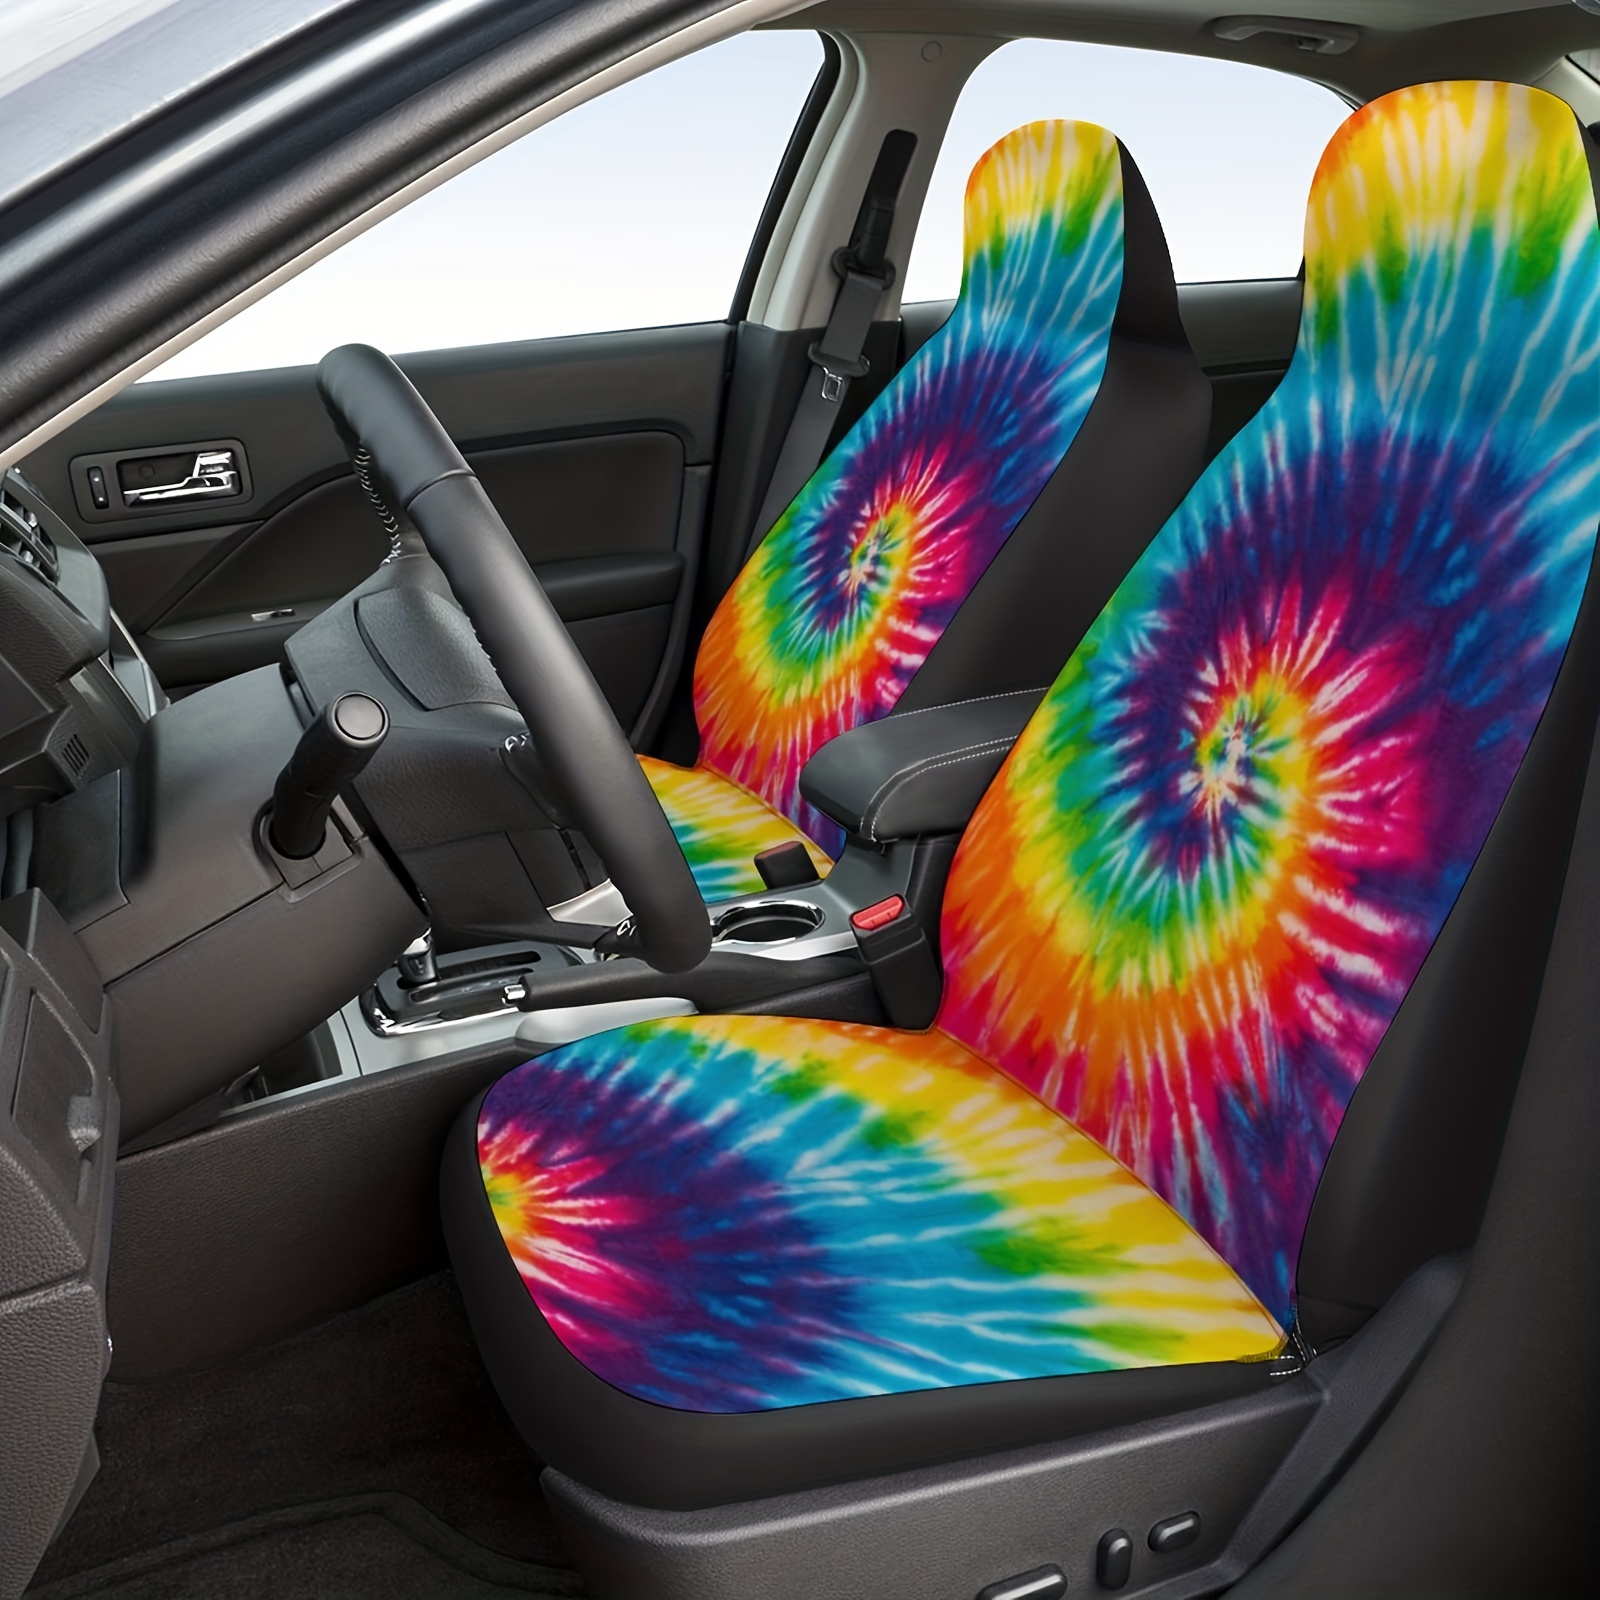 

Colorful Swirl Printing Car Rv General Car Single Seat Driver's Seat Seat Cover Car Accessories